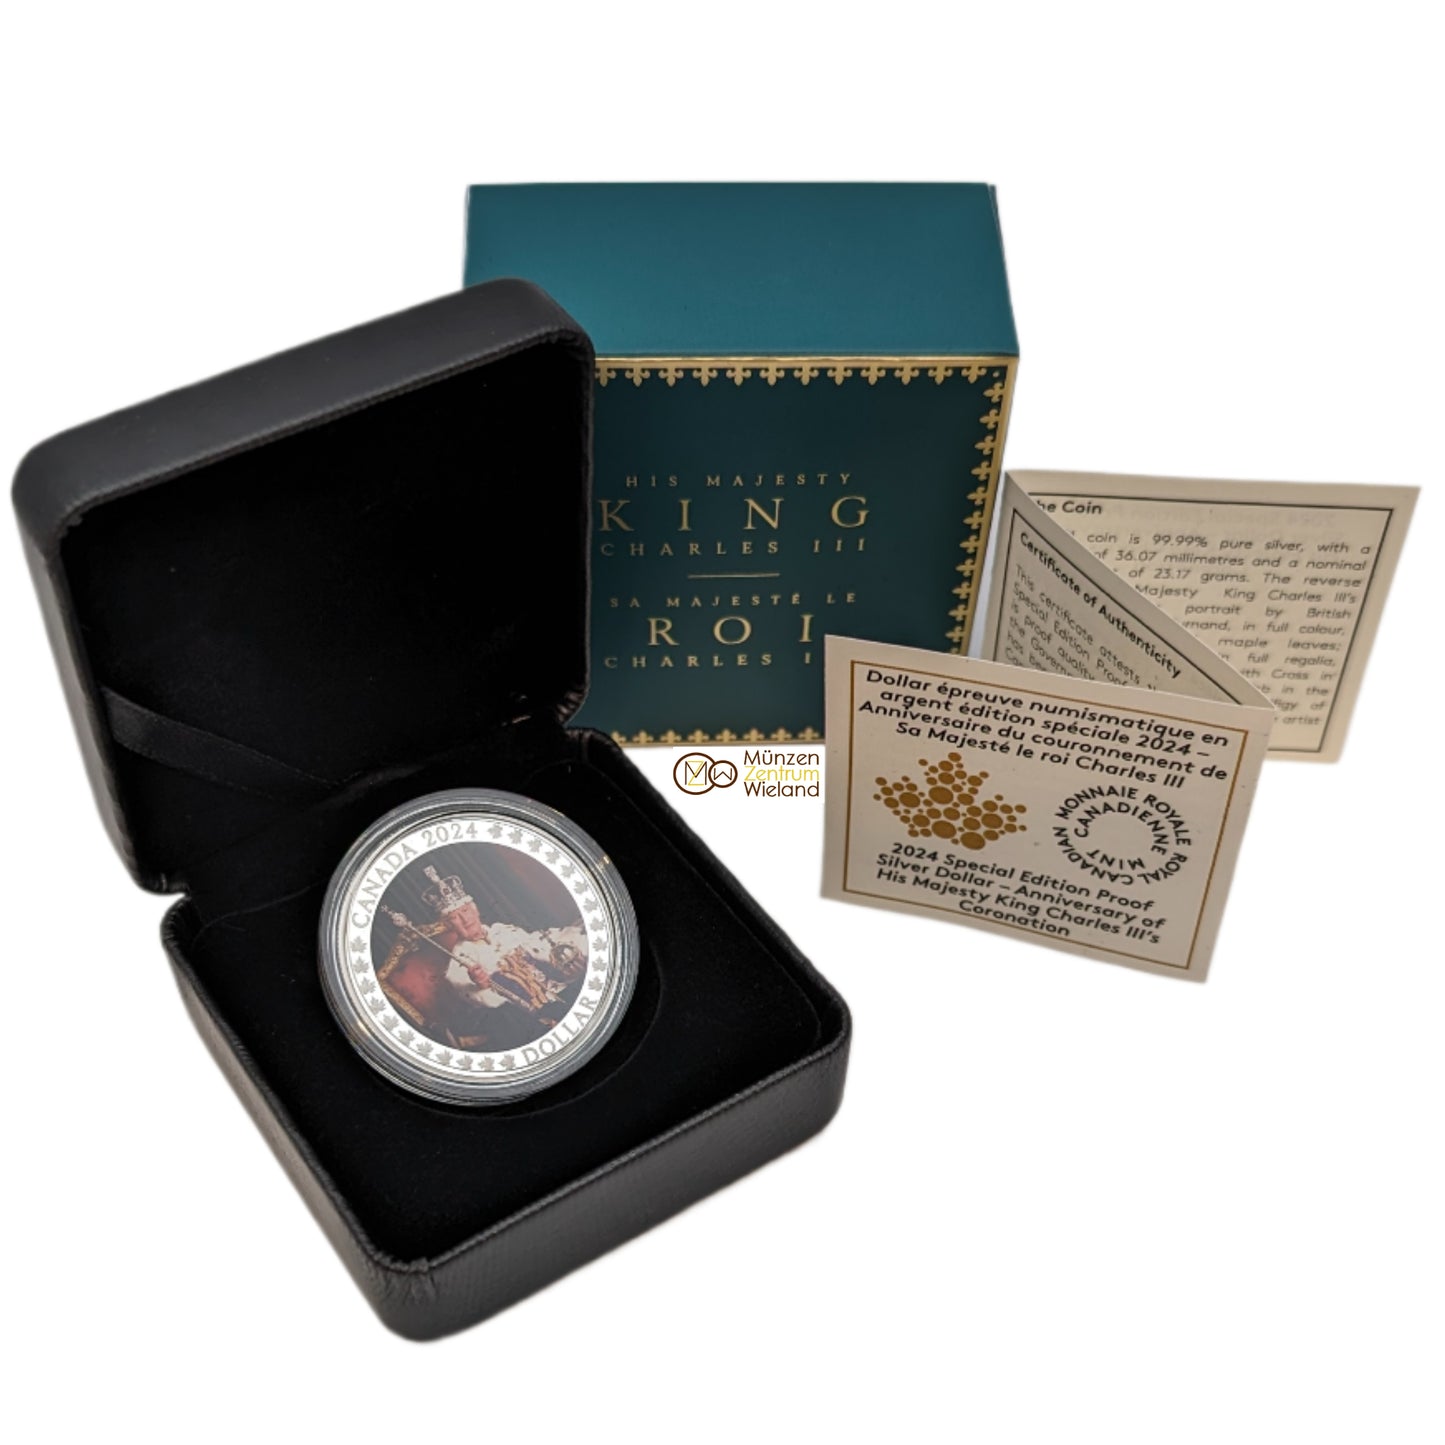 Anniversary Of His Majesty King Charles III's Coronation - Special Edition Dollar, colored